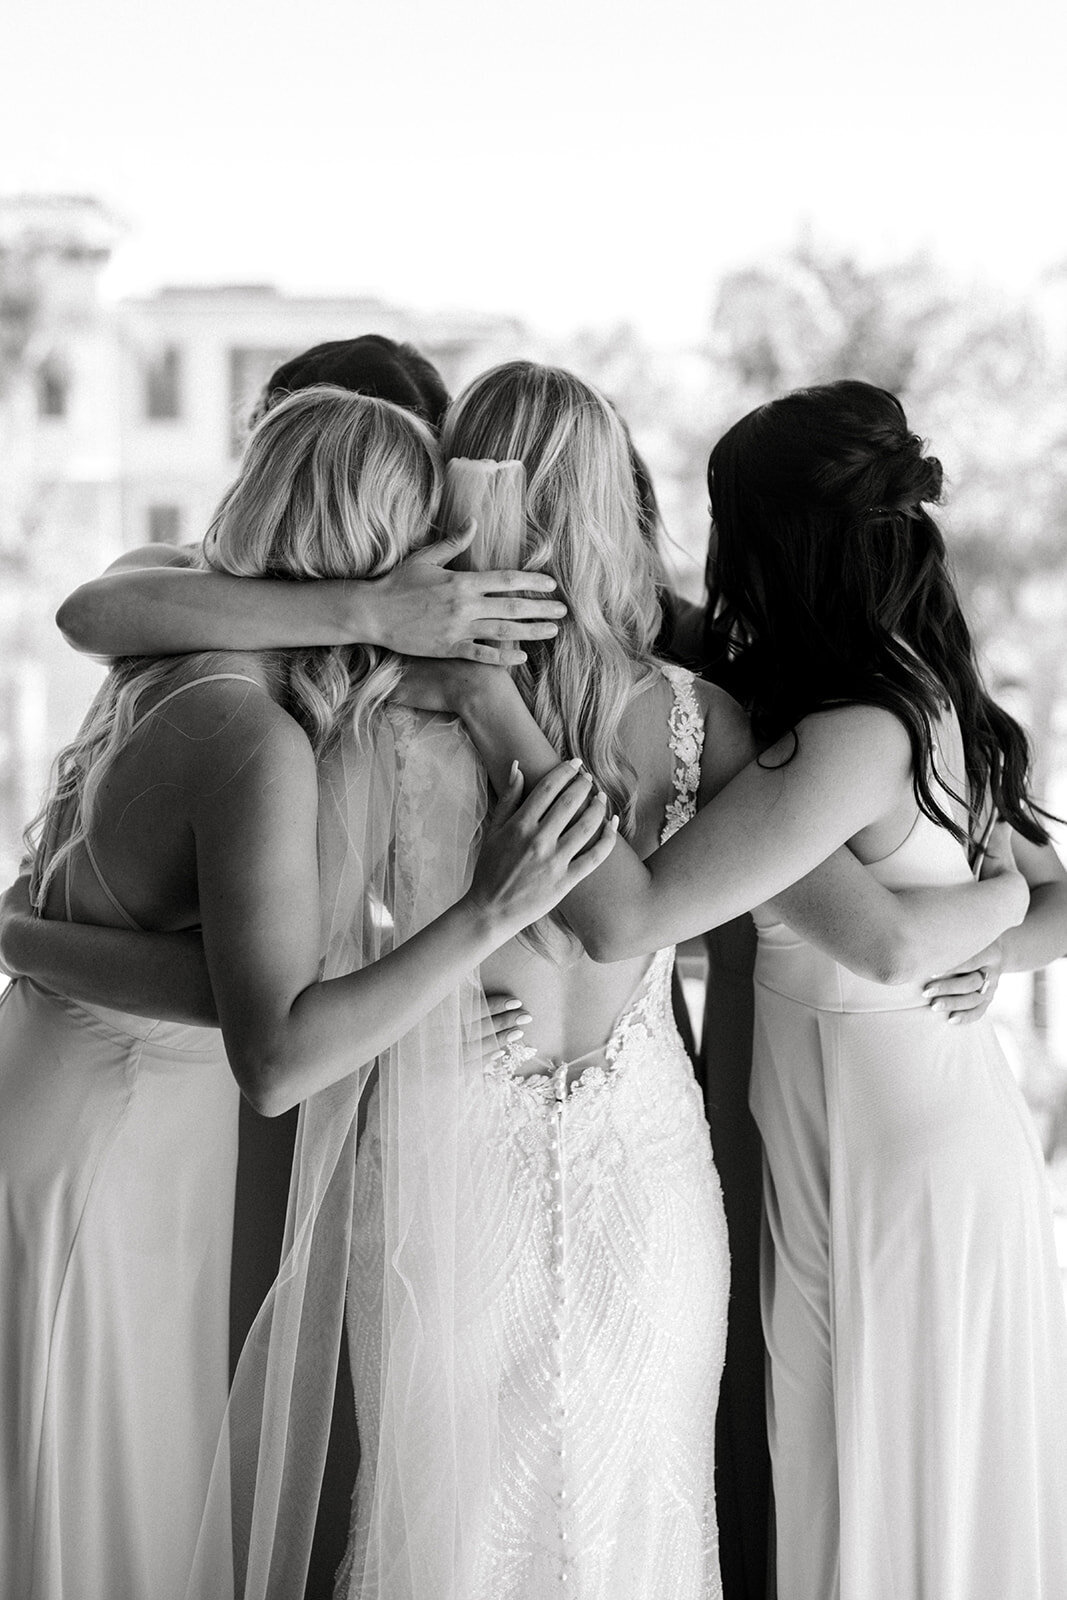 Bride and bridesmaids embrace at Dolphin Bay Resort wedding in Pismo Beach, CA